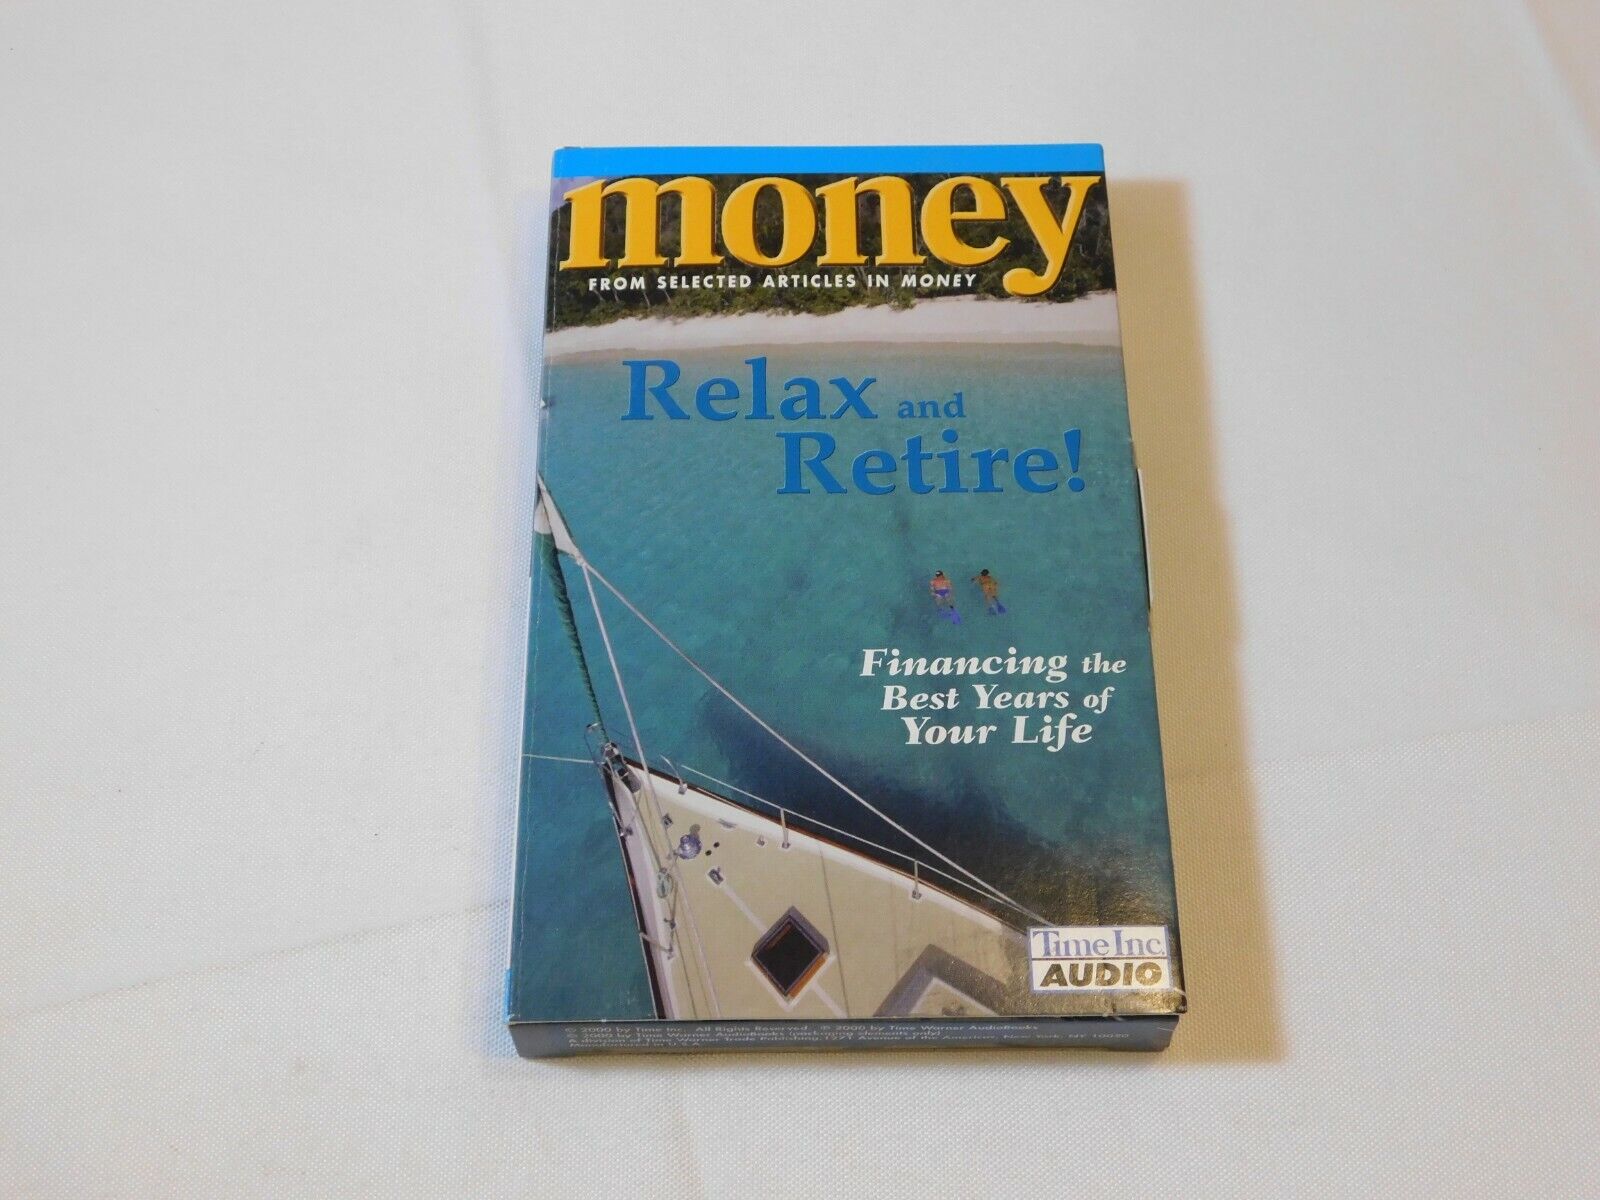  Money Financing the Best Years of Your Life by Money Magazine...